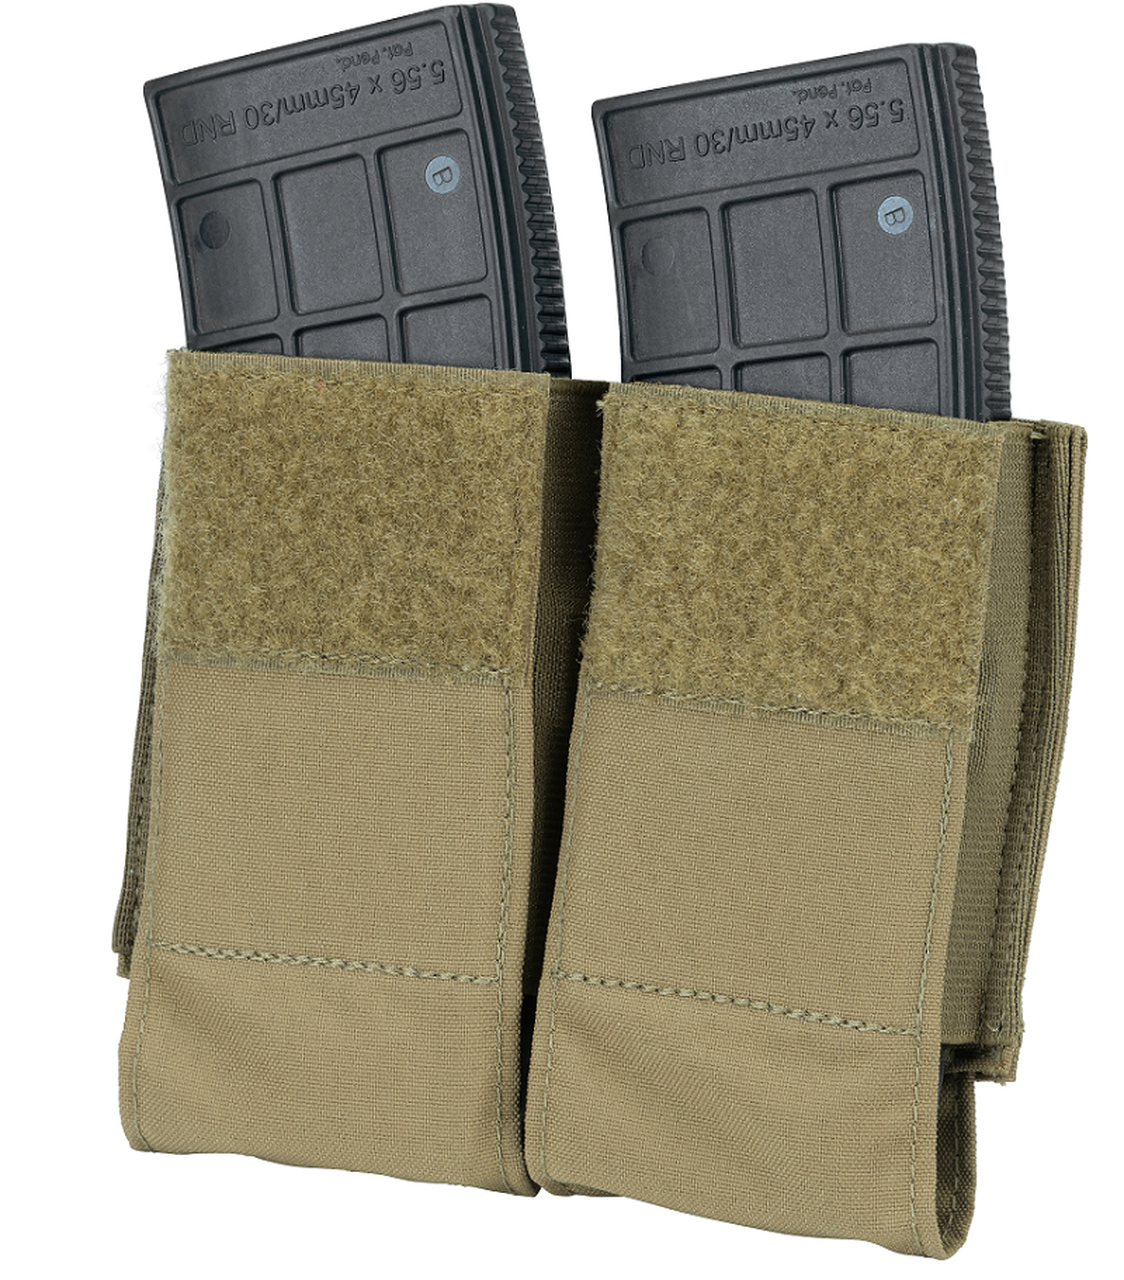 Shellback Tactical Coyote double mag pouch.